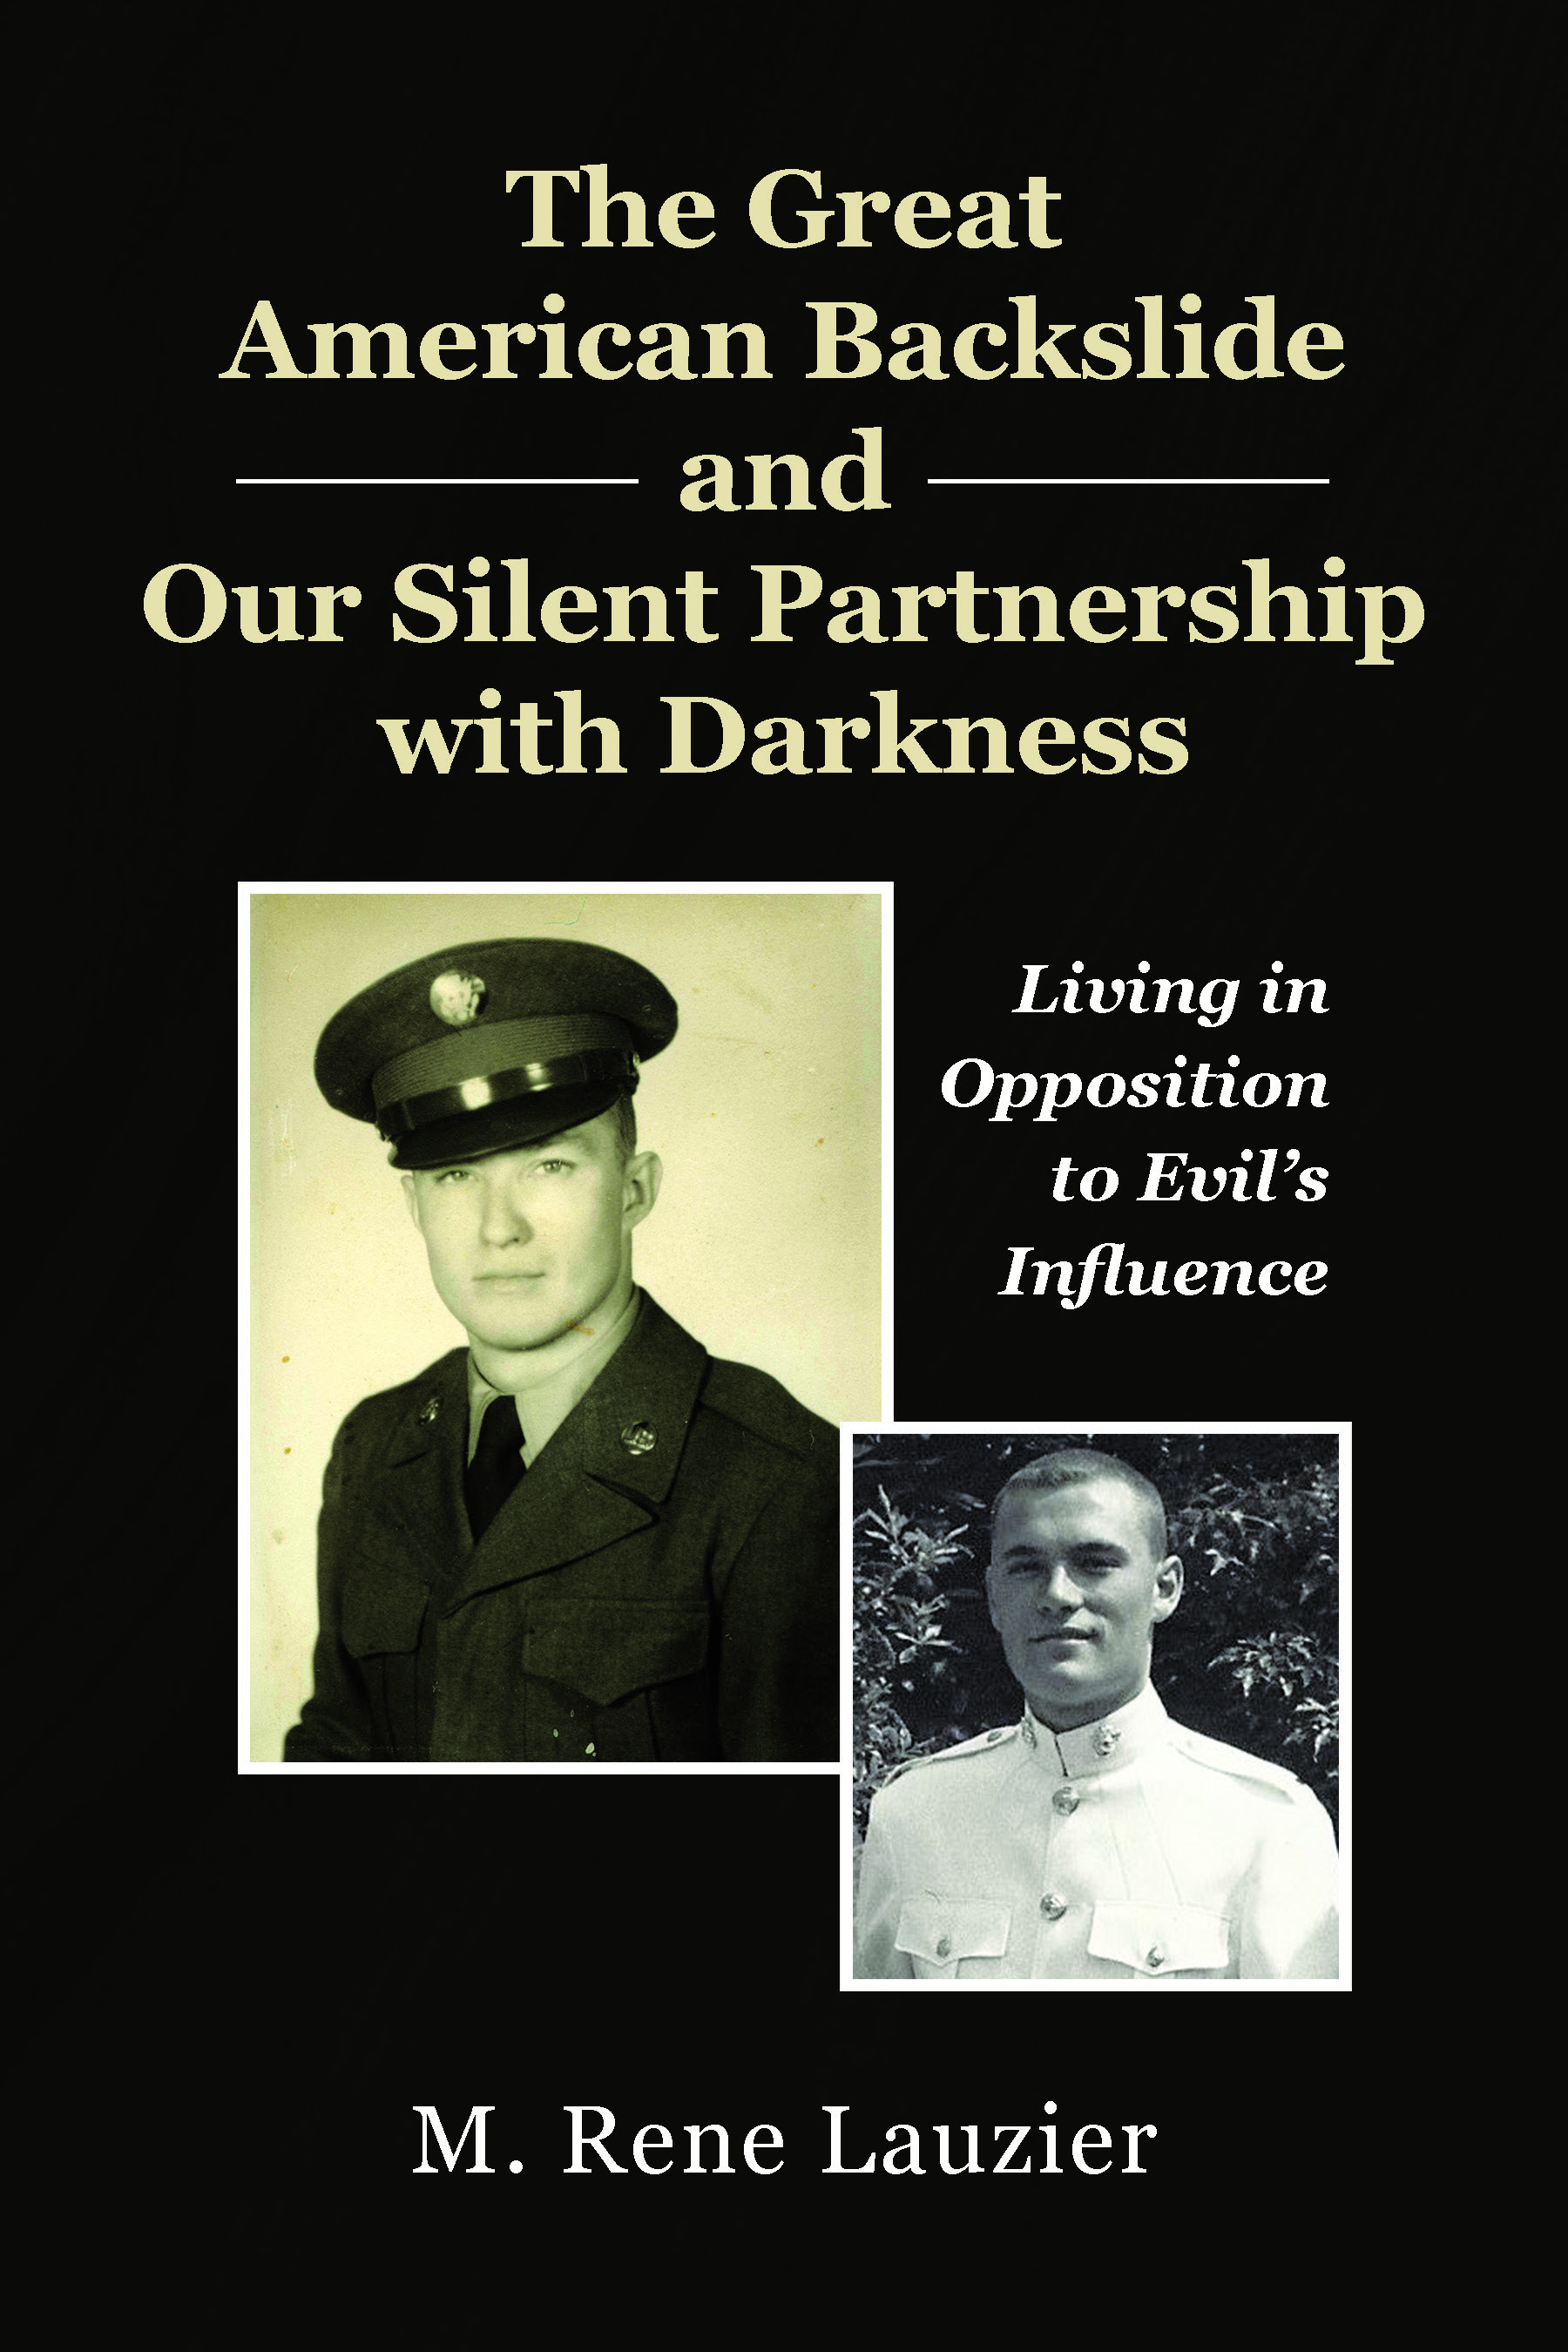 Author M. Rene Lauzier’s New Book, "the Great American Backslide and Our Silent Partnership with Darkness," Explores How the Dark Dominion Separates America from God